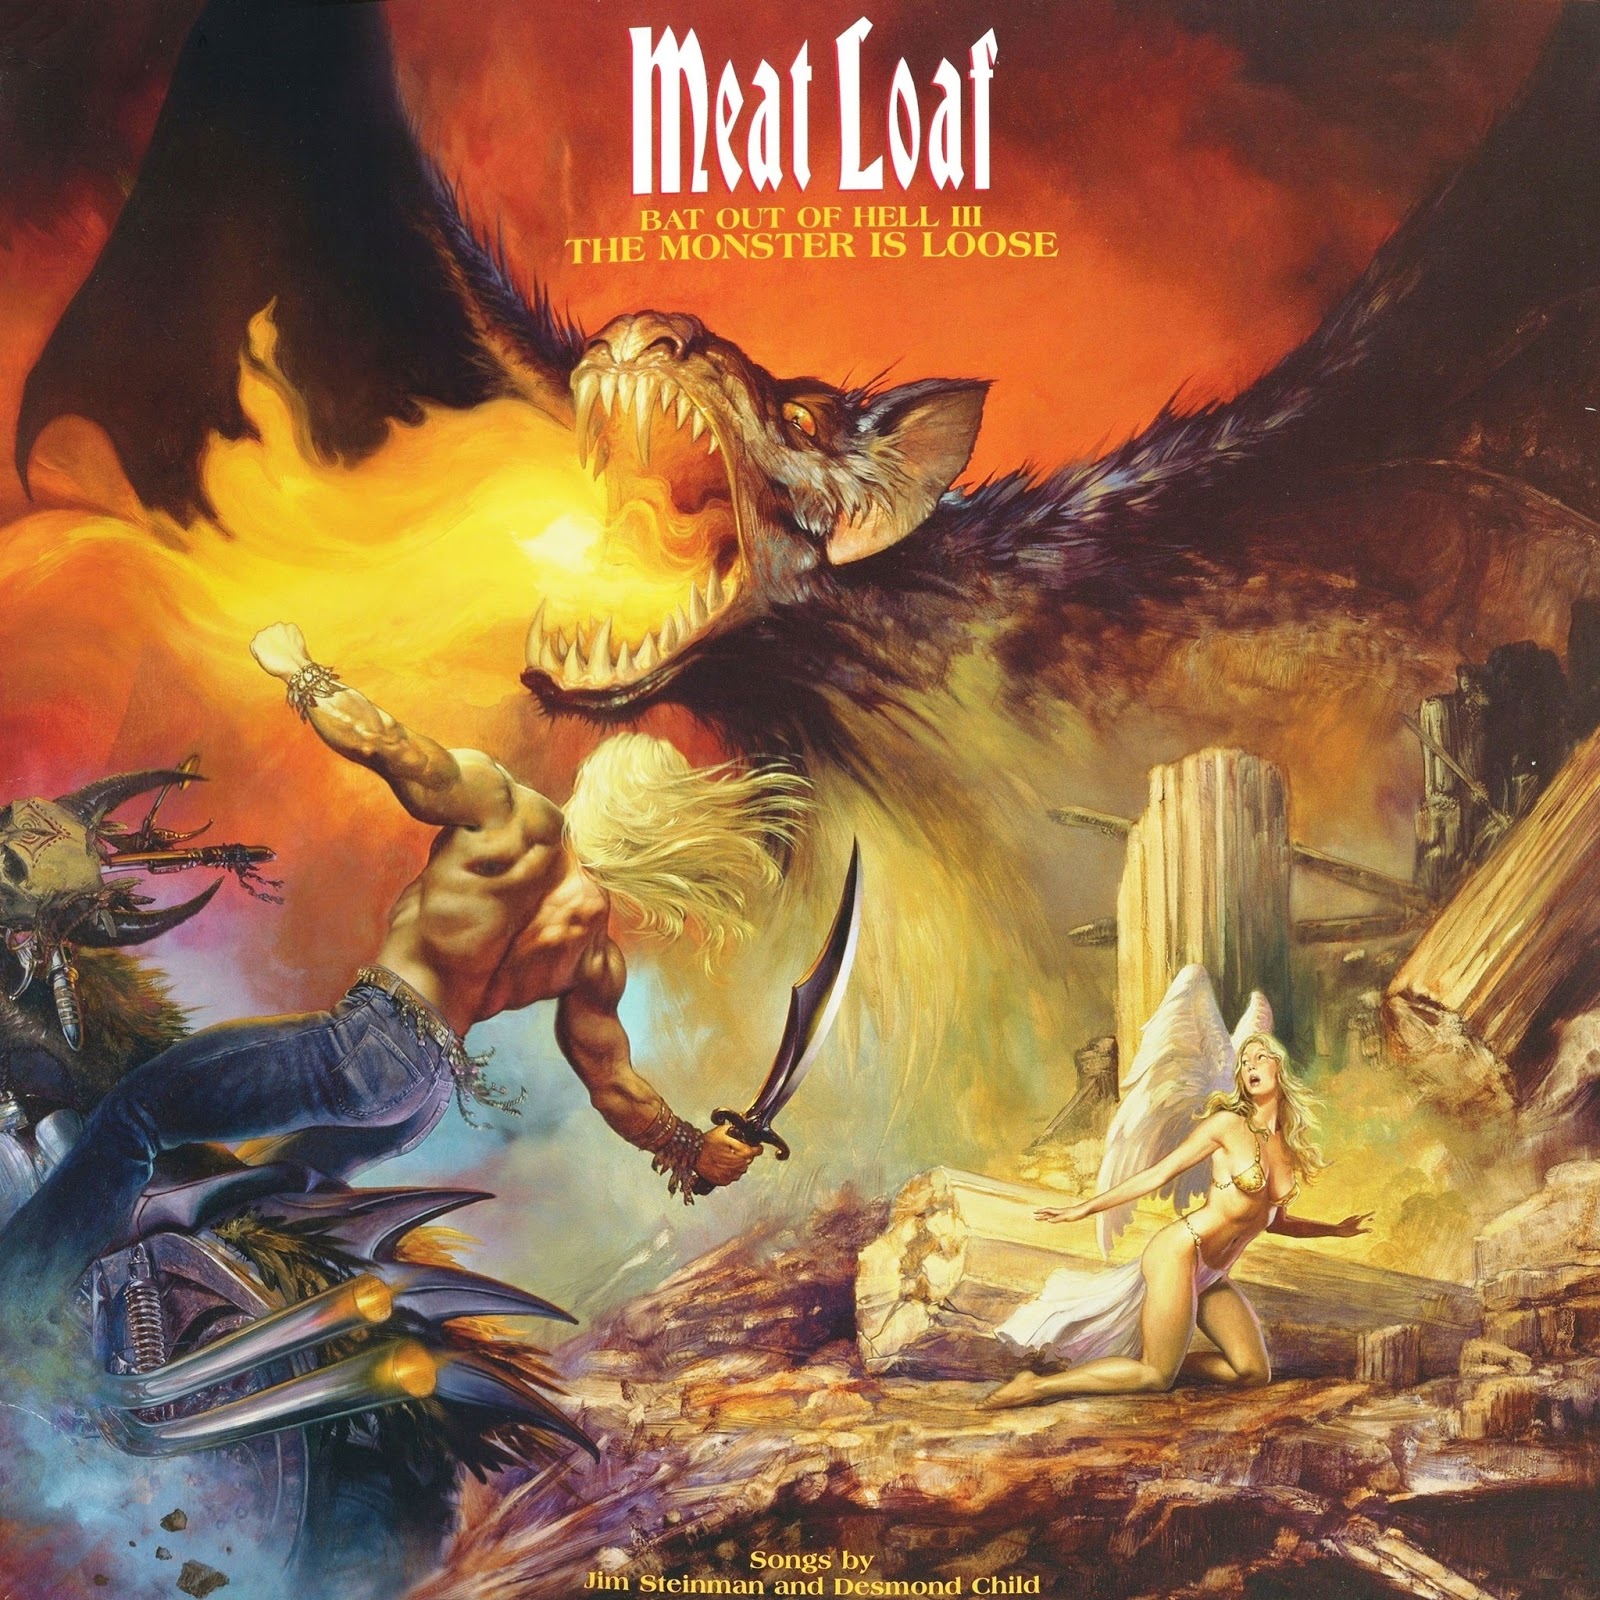 Meat Loaf - Hell Can Wait - Rare MINT Italian Import CD-NYC 1993 Bat Out Of  Hell 724354260827